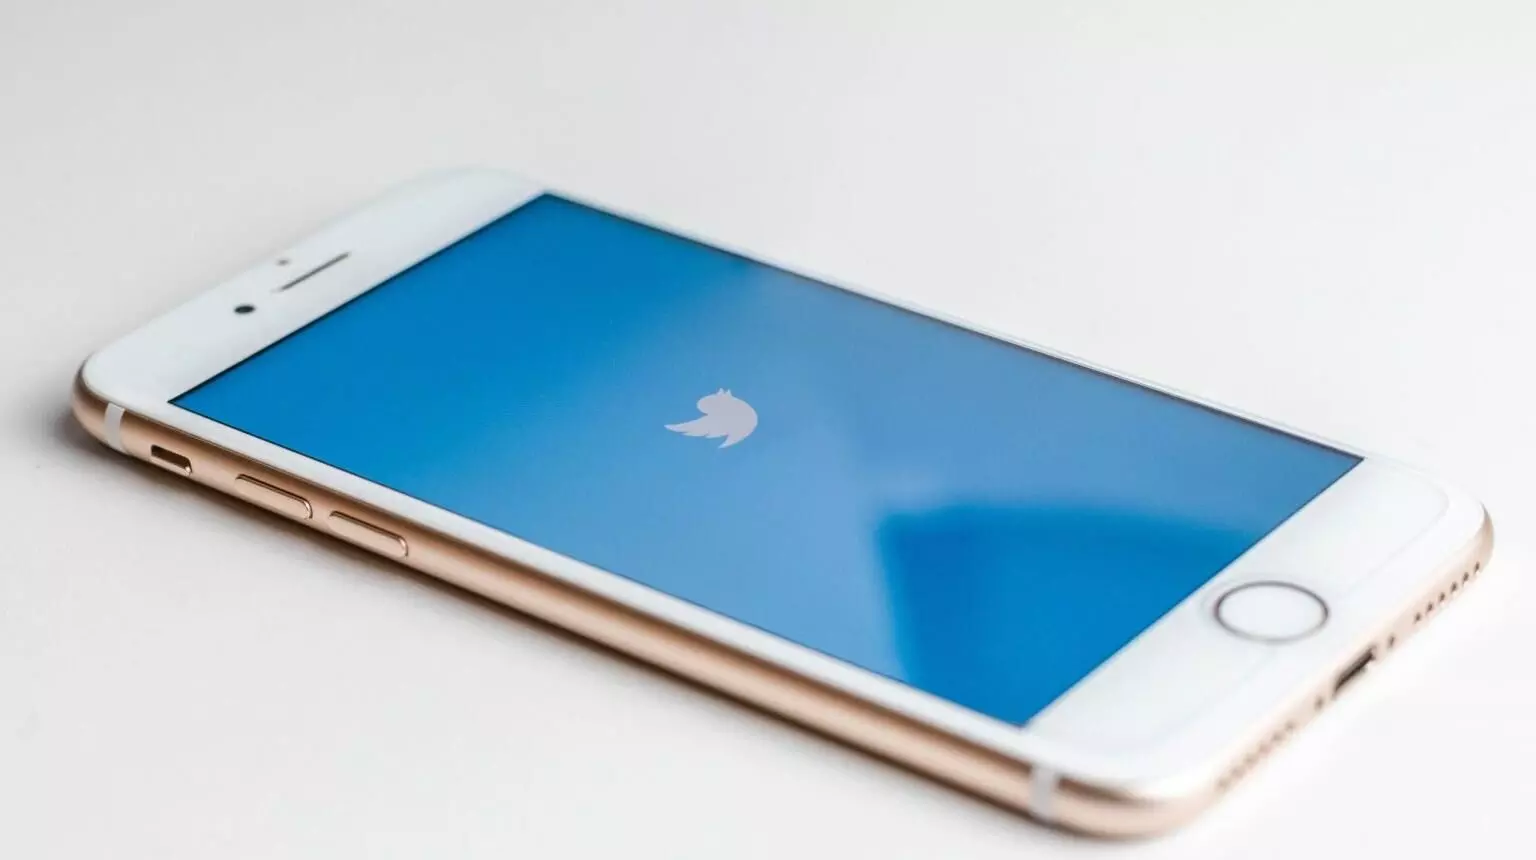 Twitter working on paid subscription model: Report